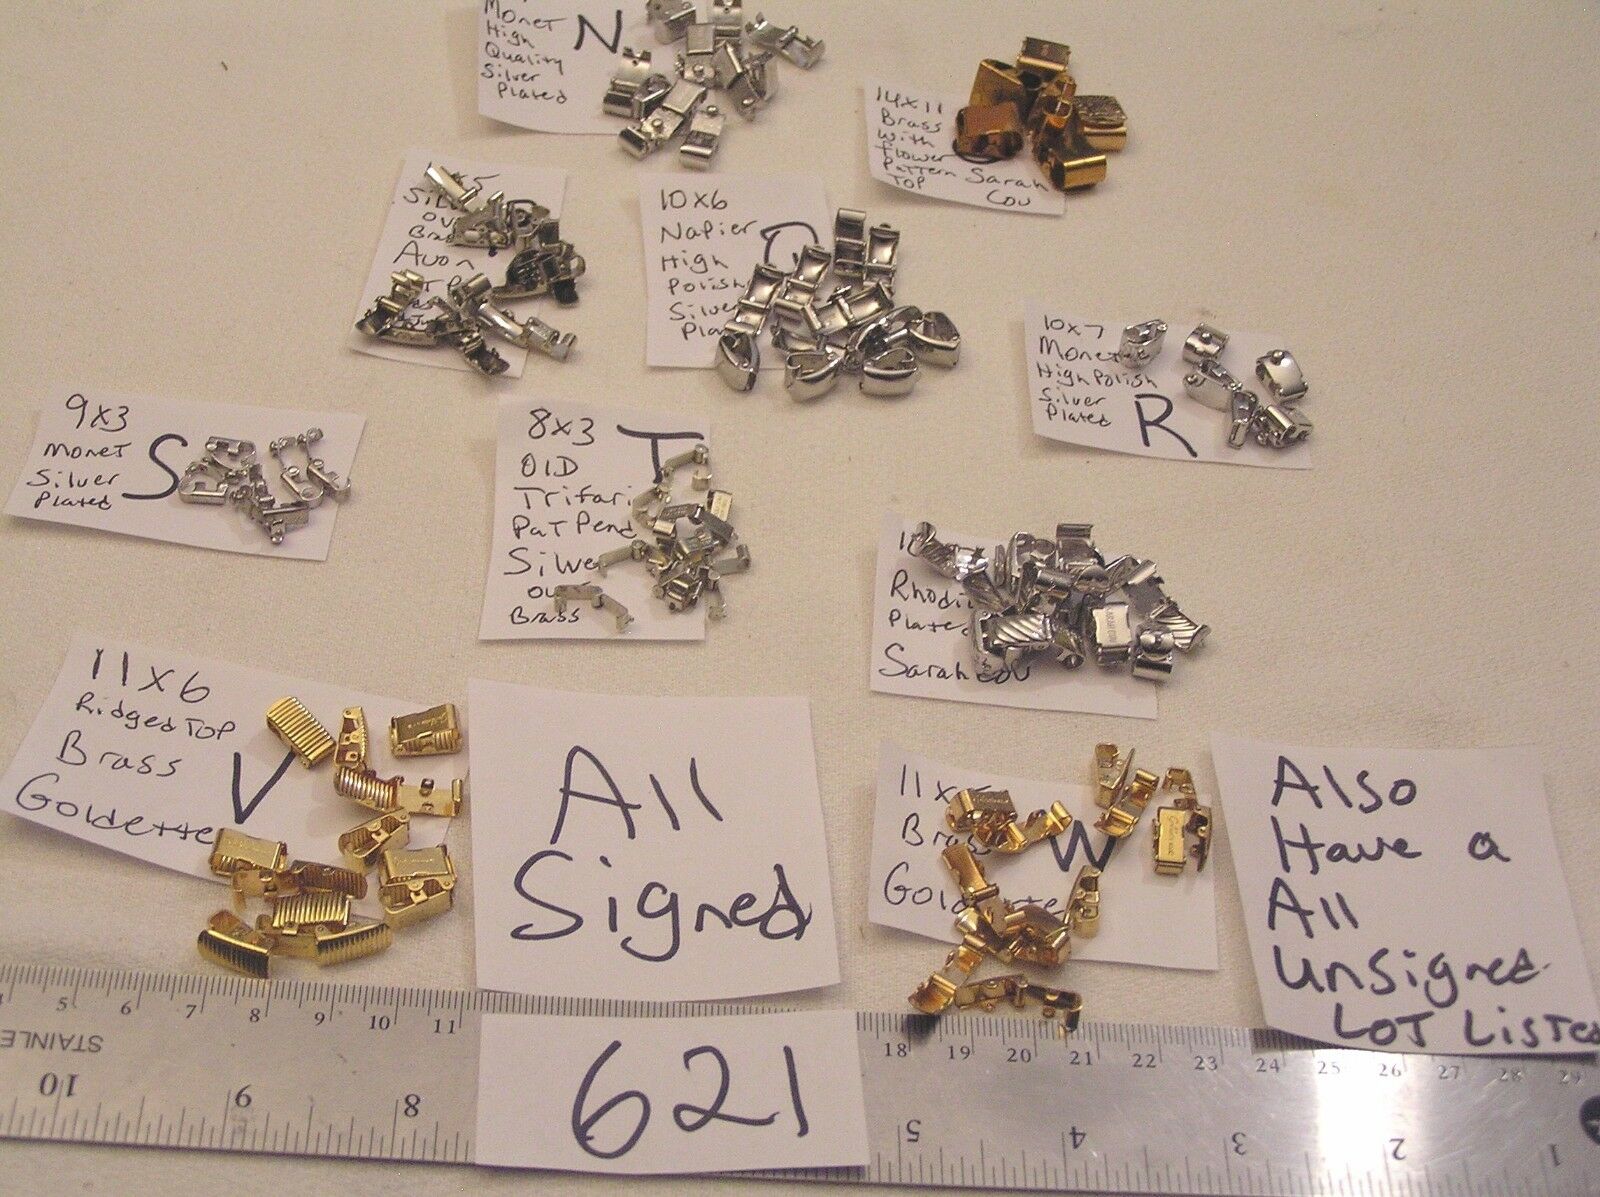 Vtg Fold Over Clasp Lot All Signed Jewelry Findings Craft Repair Bracelet + Lot